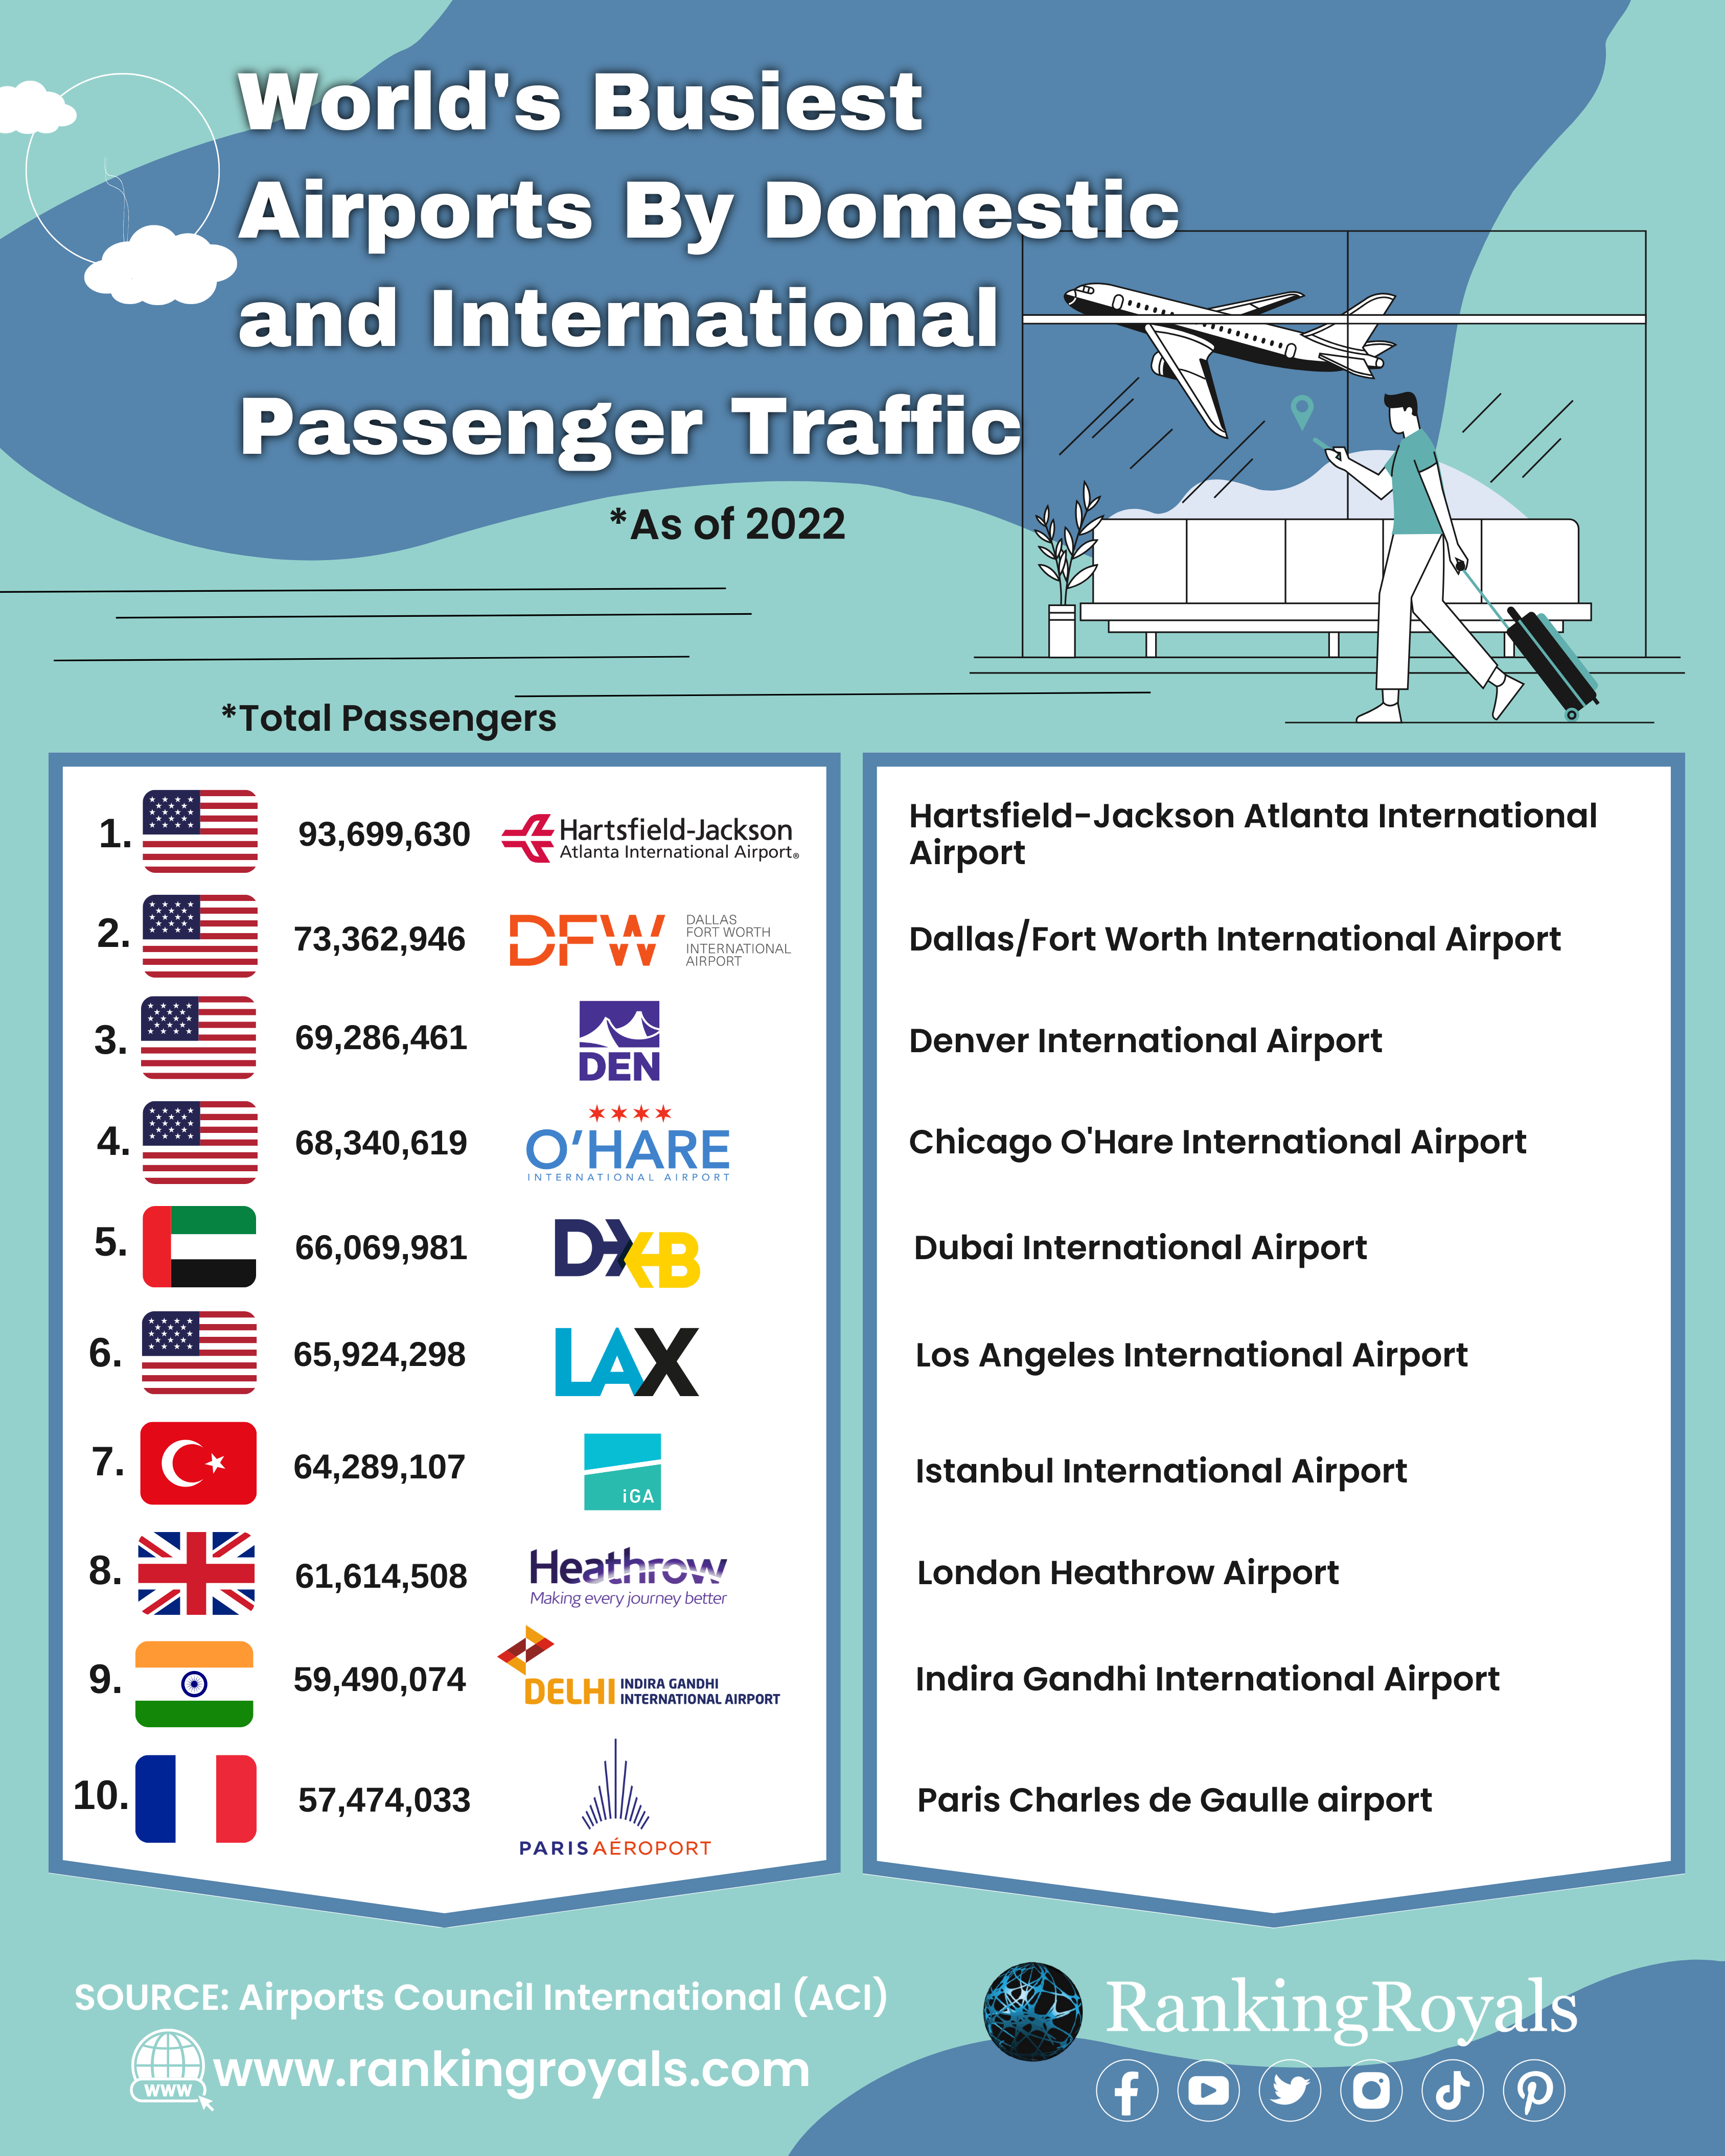 World's Busiest Airports By Domestic and International Passenger Traffic